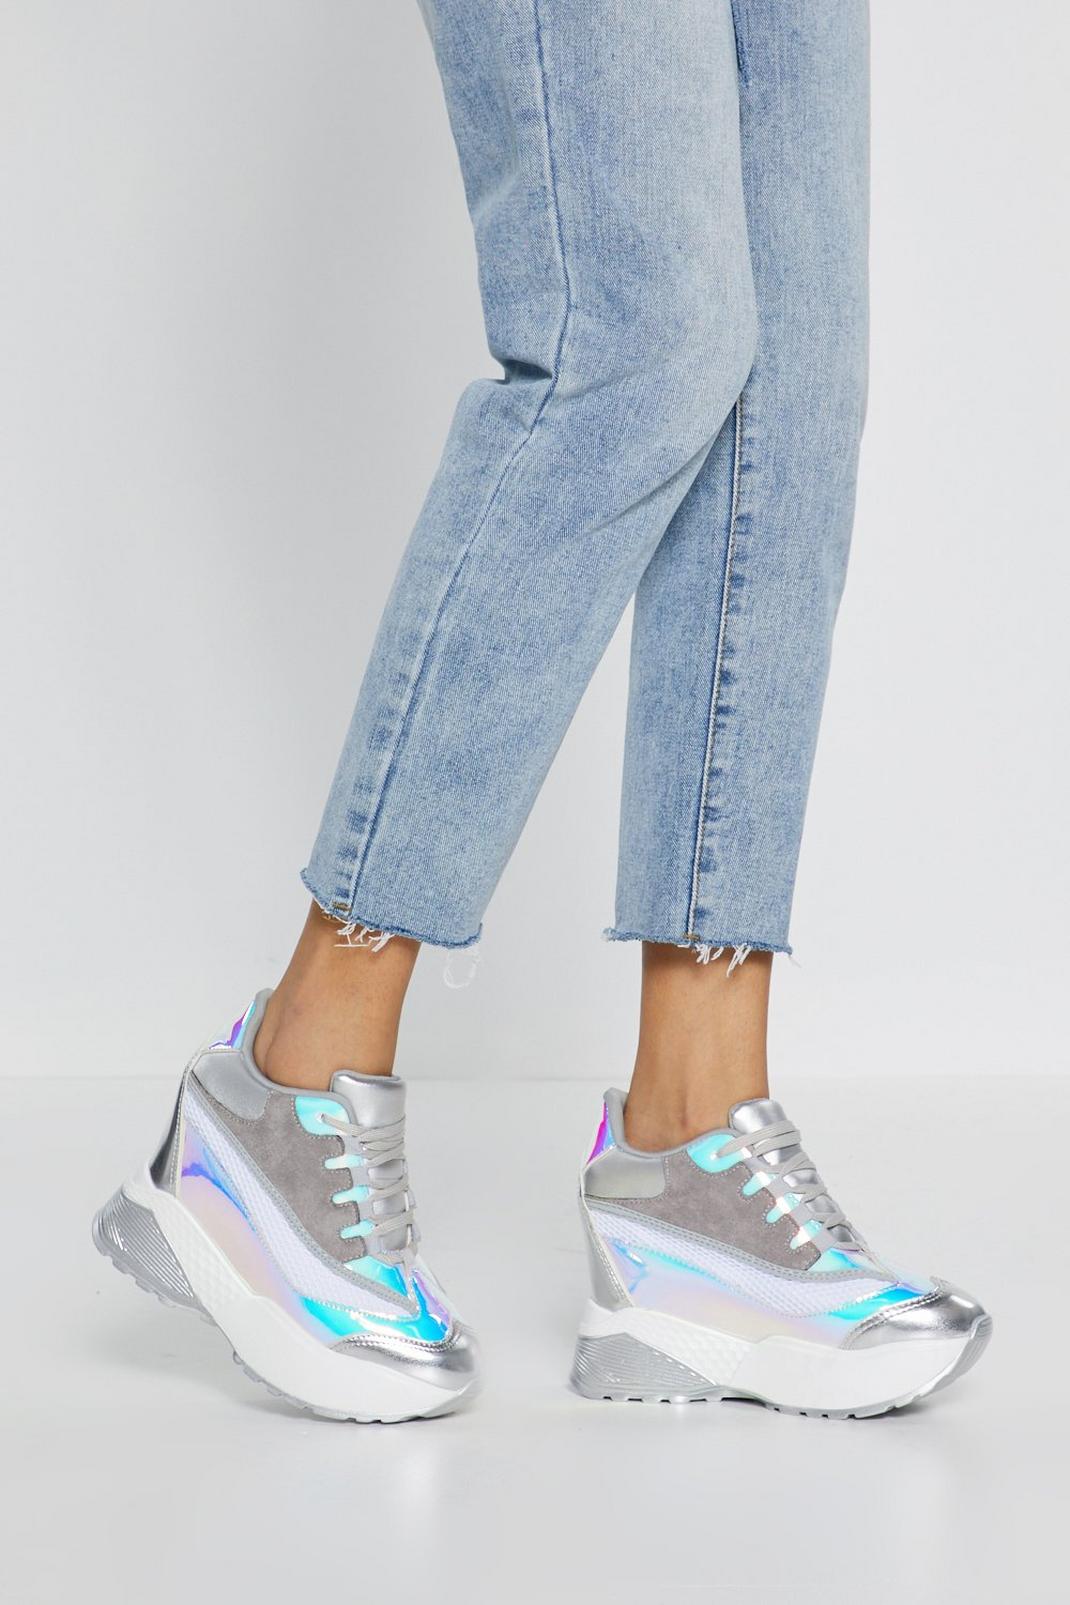 Disruptor 2 Iridescent Metallic Sneakers  Iridescent shoes, Pretty sneakers,  Sneakers fashion